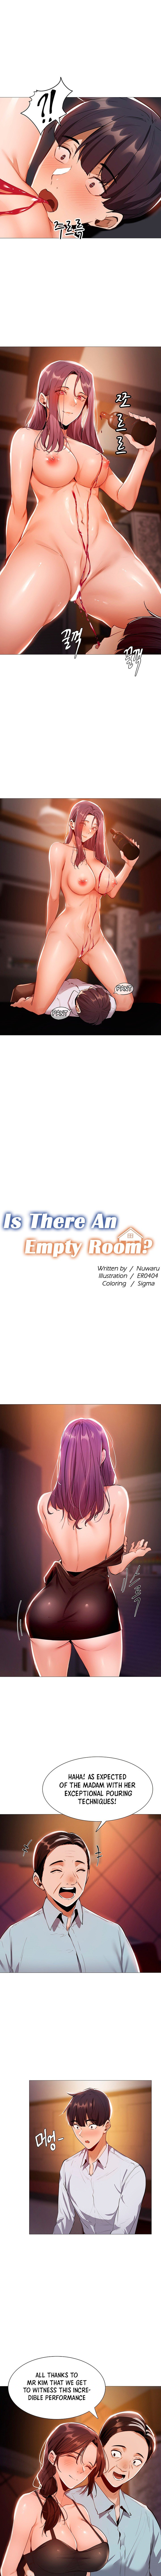 is-there-an-empty-room-chap-7-3